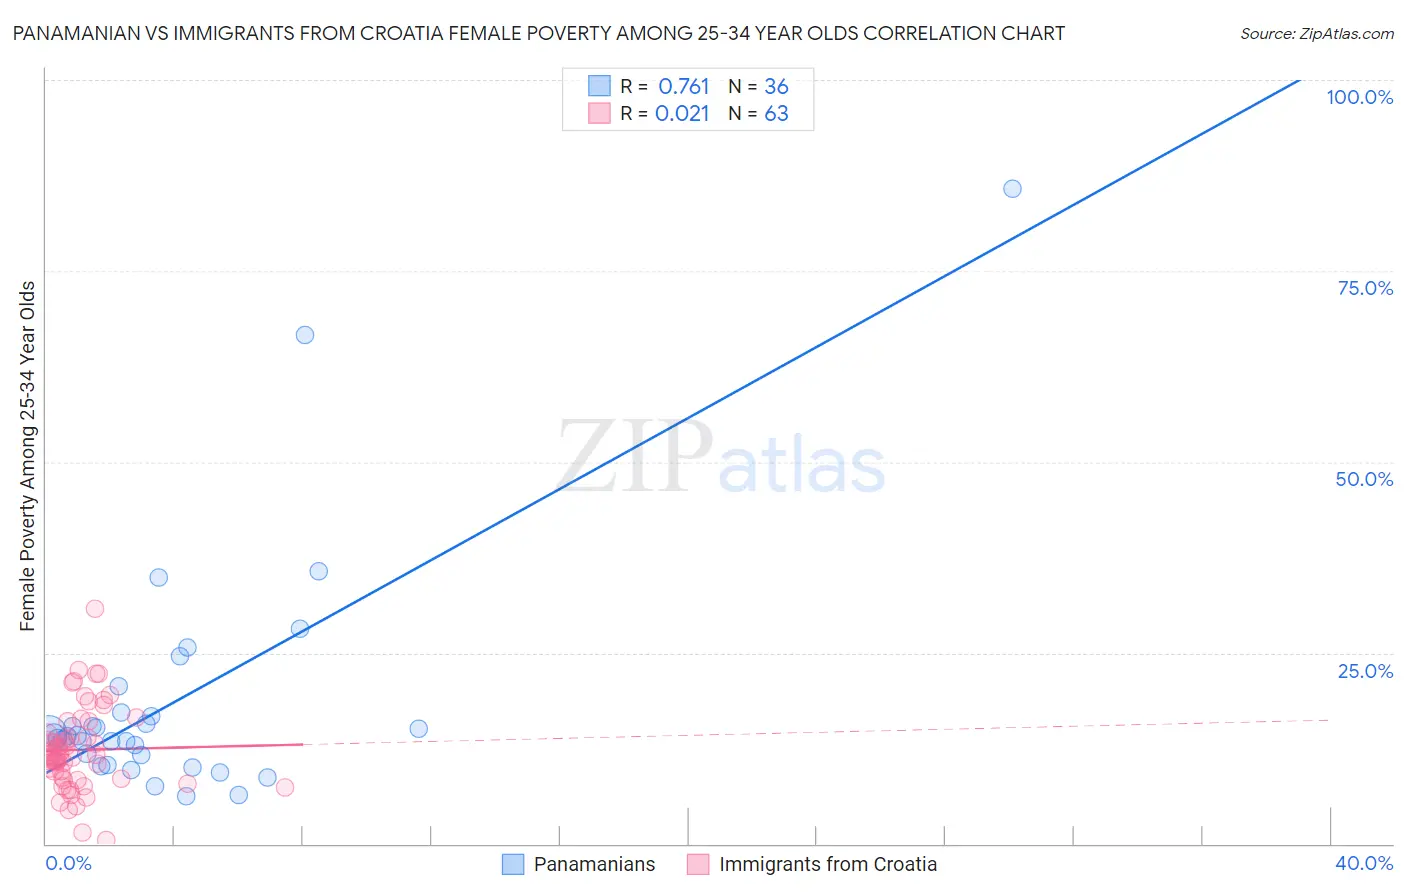 Panamanian vs Immigrants from Croatia Female Poverty Among 25-34 Year Olds